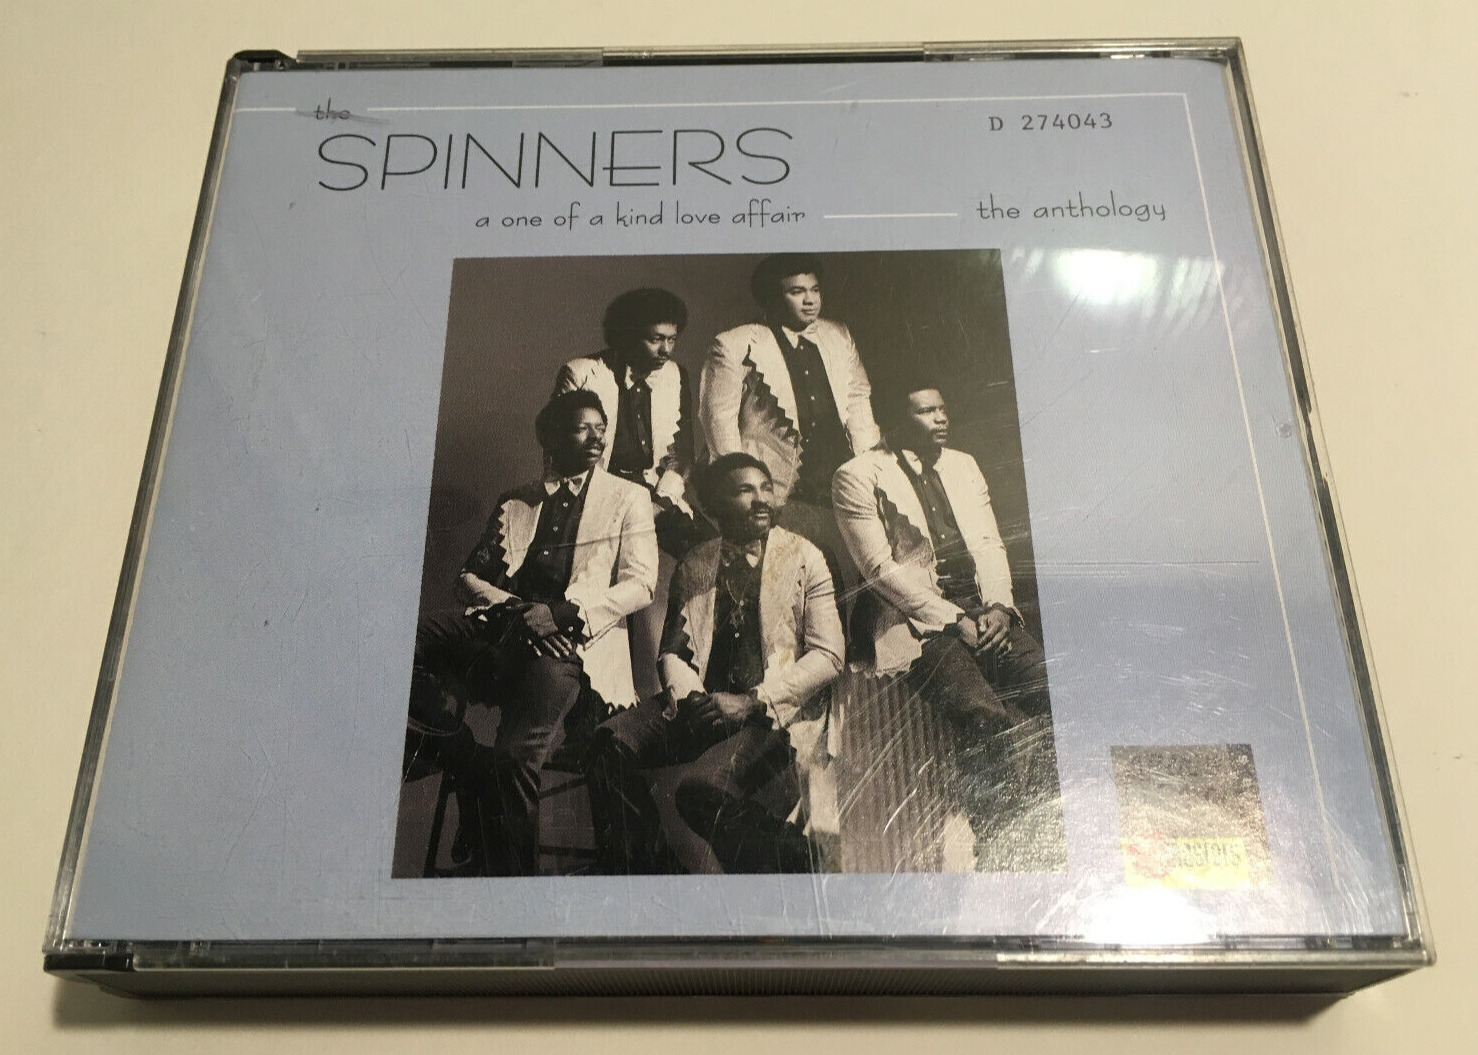 The Spinners: A One of a Kind Love Affair Anthology (2-CD Set, 1991) See Pics